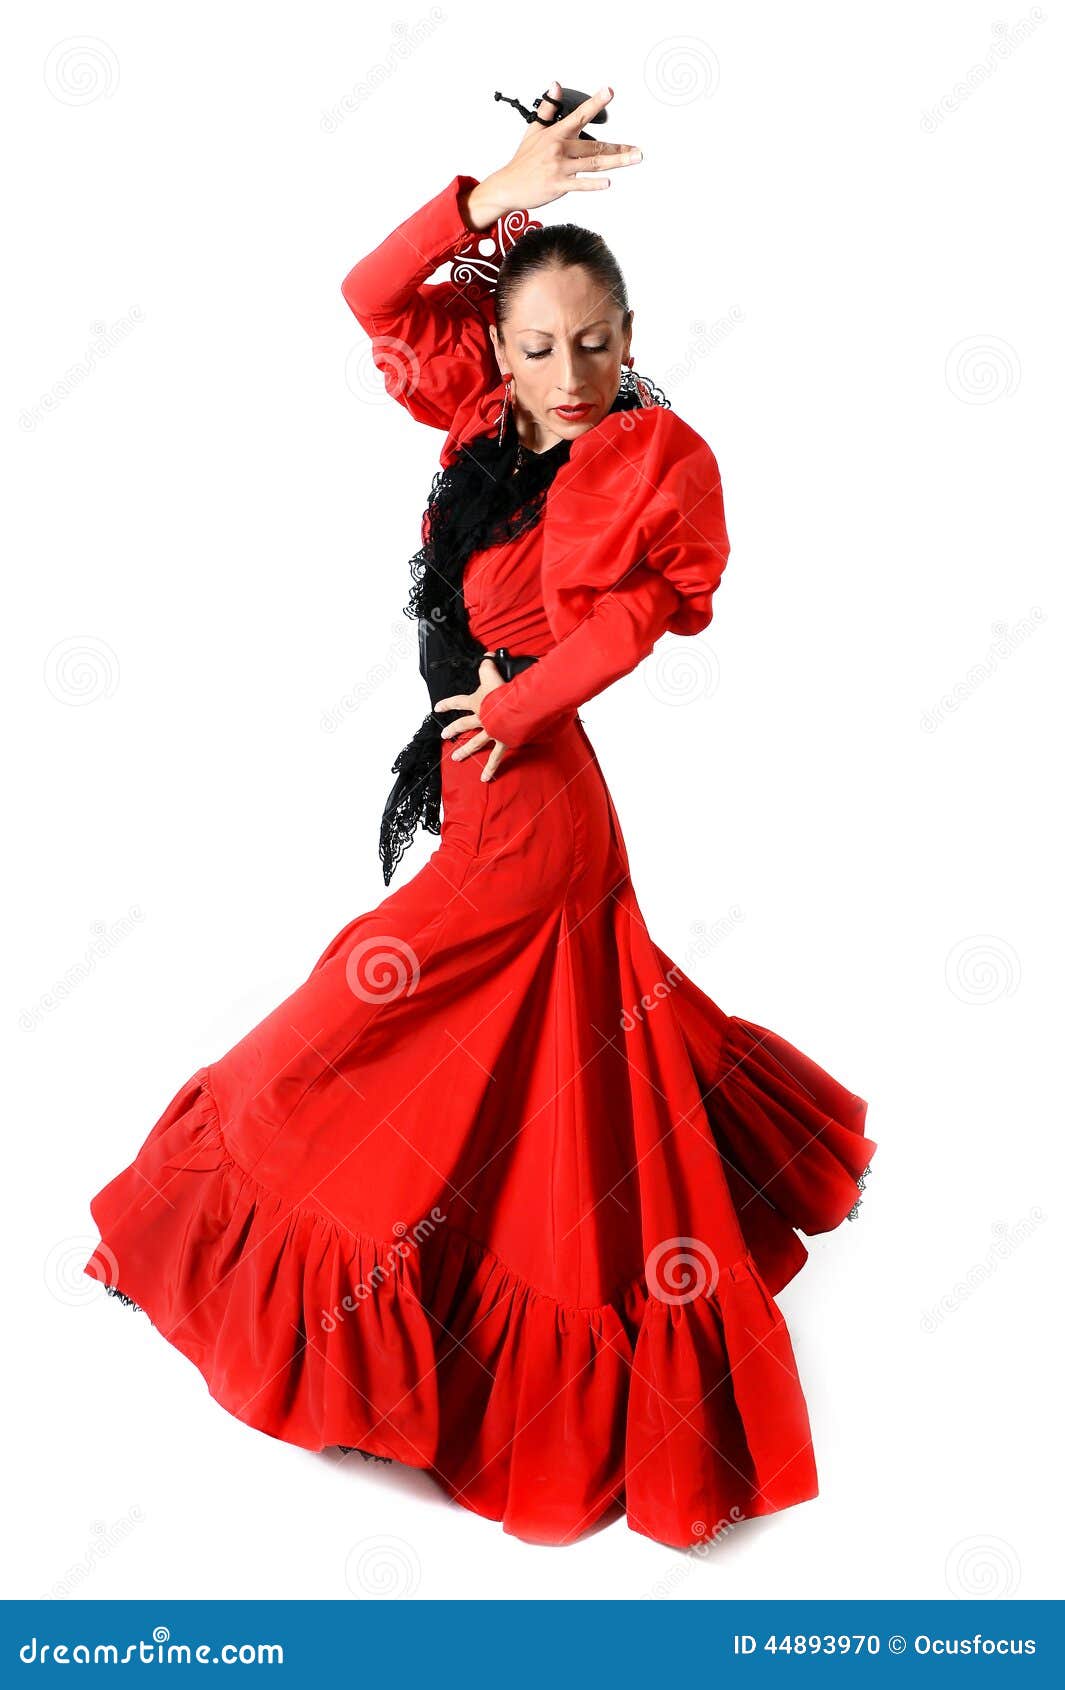 young spanish woman dancing flamenco with castanets in her hands